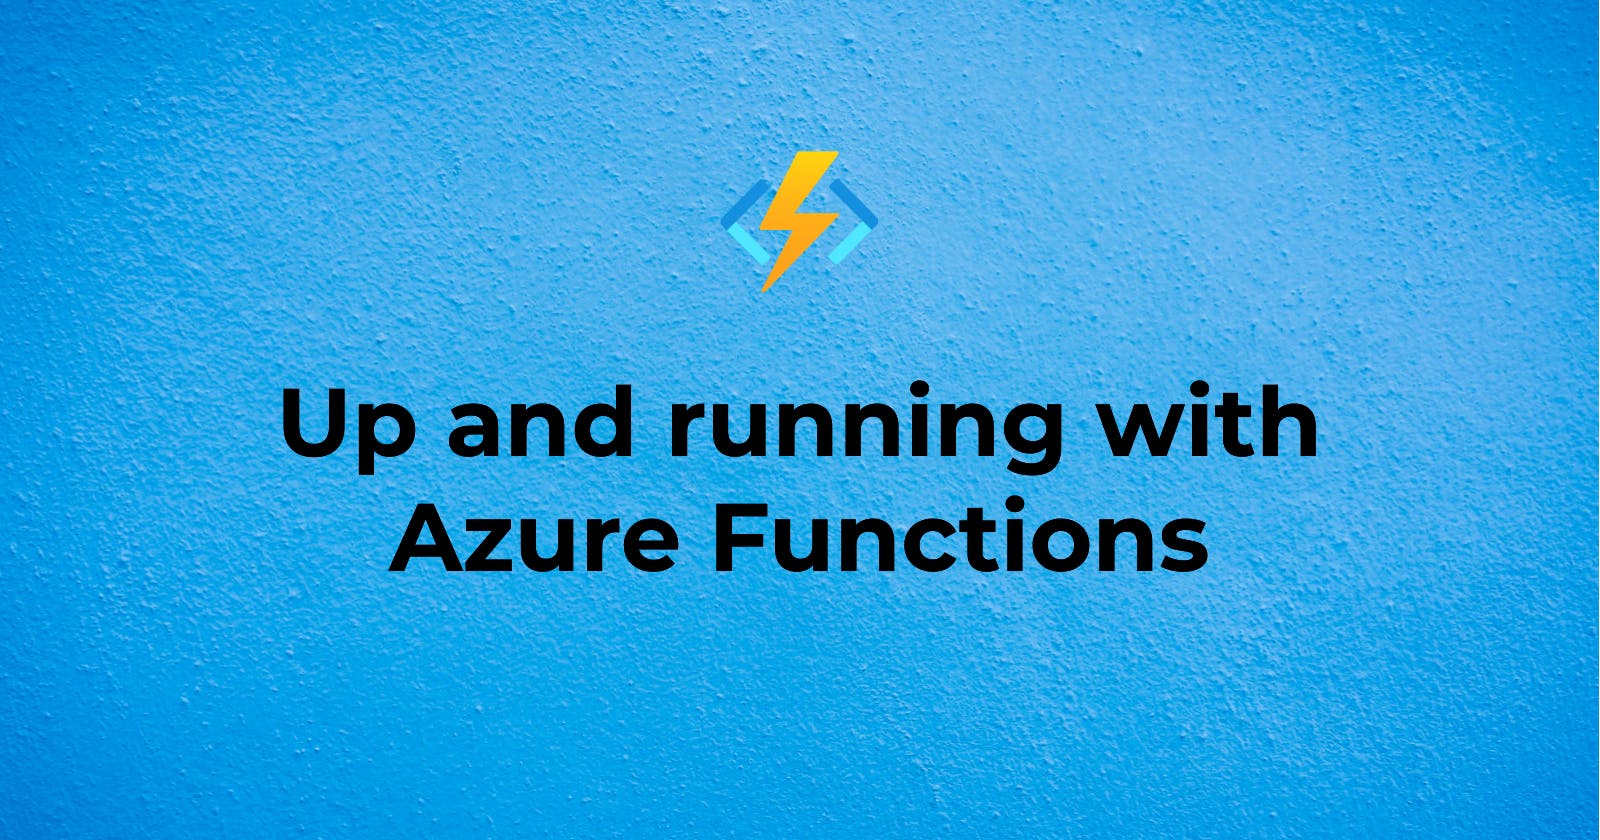 Up and running with Azure Functions